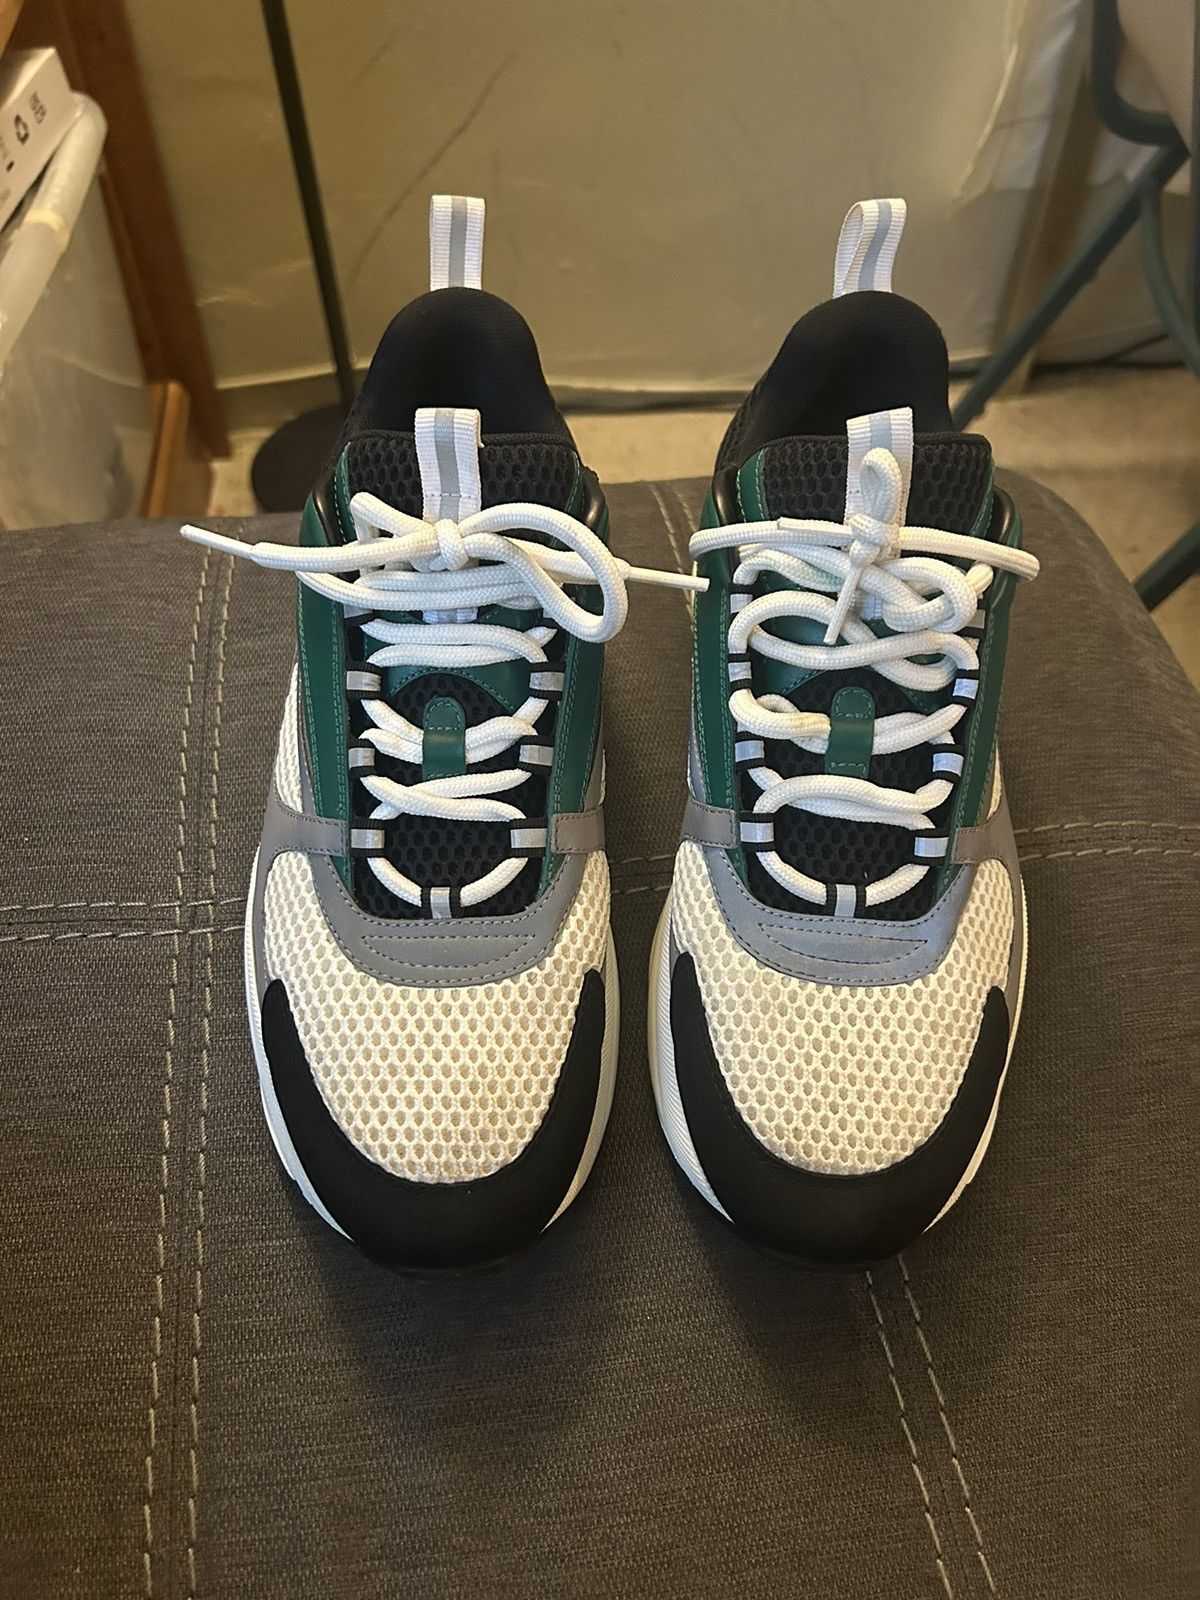 Pre-owned Dior B22 Green/white/black Shoes